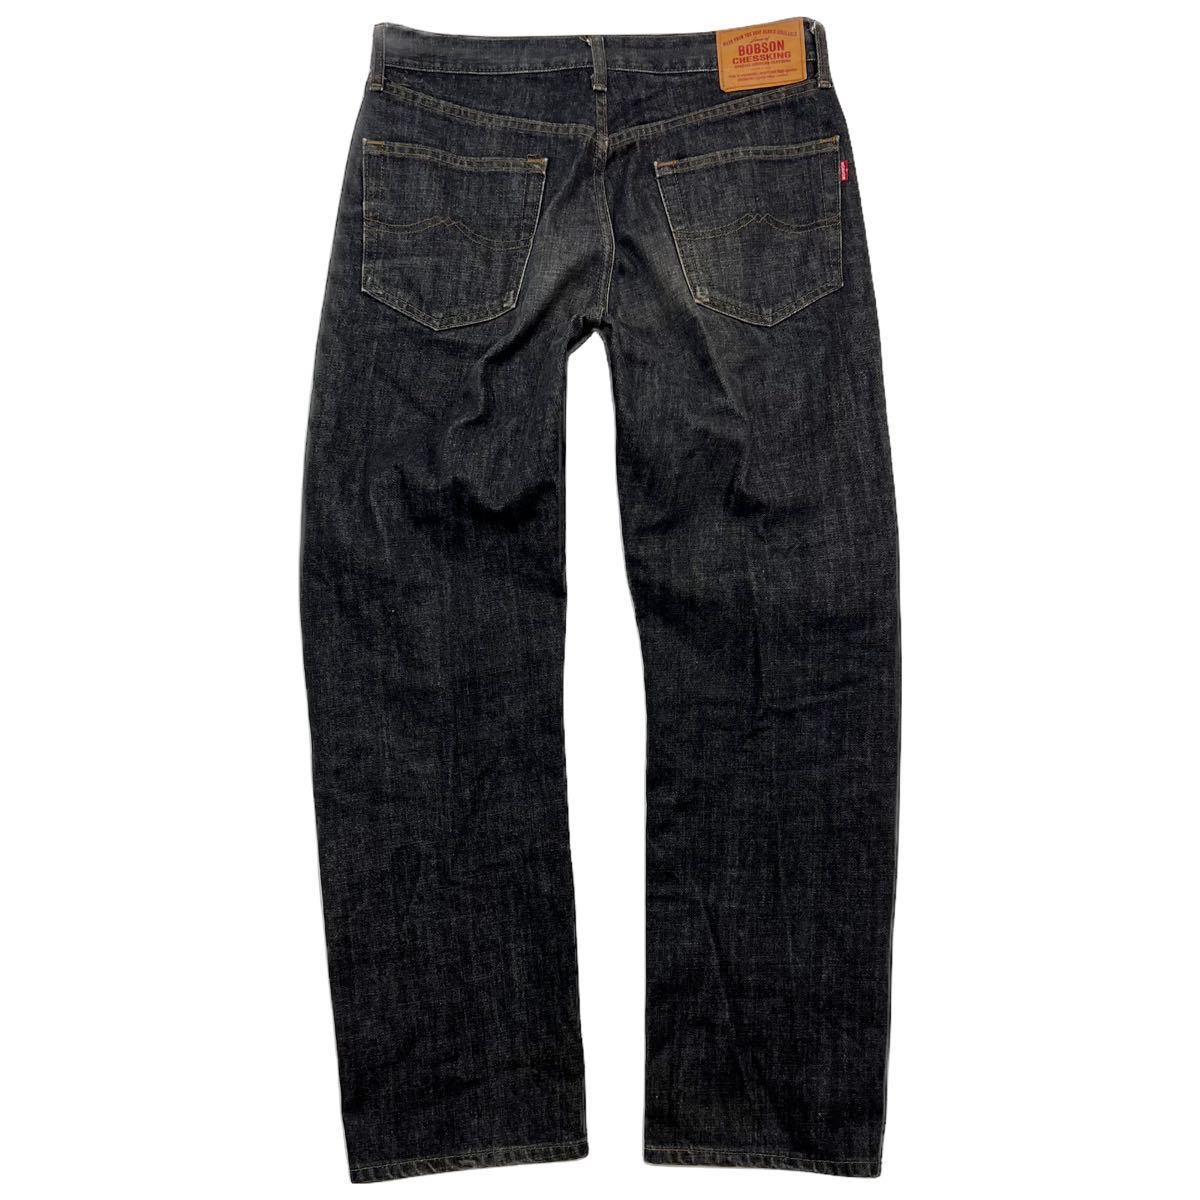 BOBSON *.. put on . style * black jeans strut Denim pants W33 American Casual adult casual old clothes popular Bobson #Ja6768